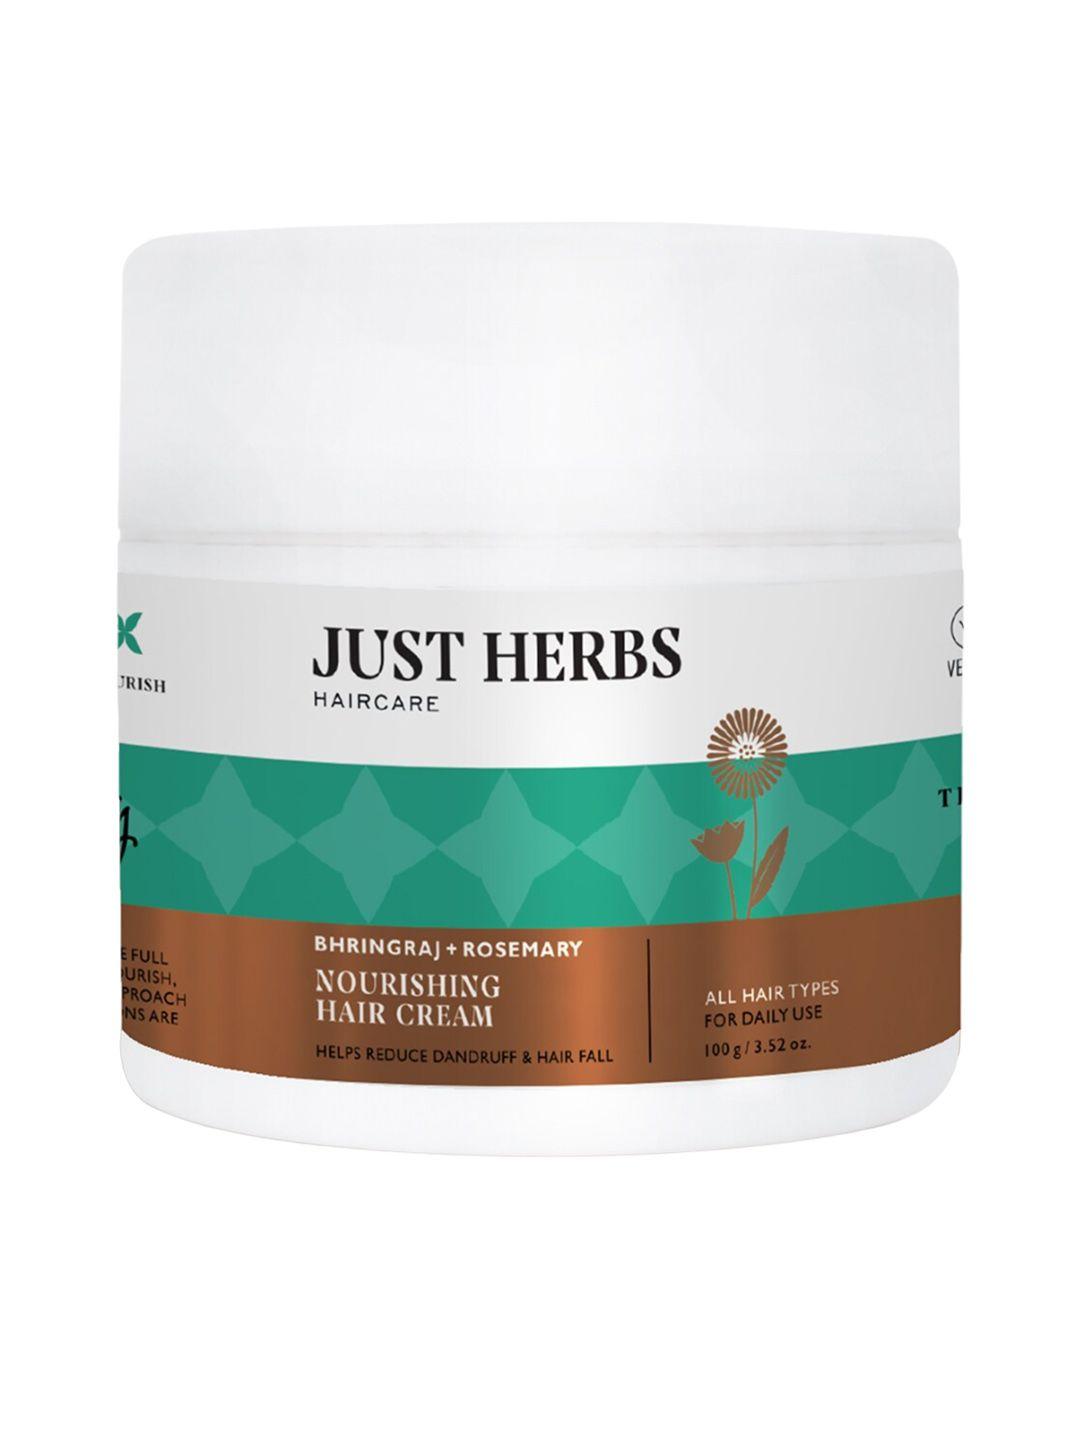 just-herbs-nourishing-hair-mask-cream-for-dry-and-frizzy-hairs---100g